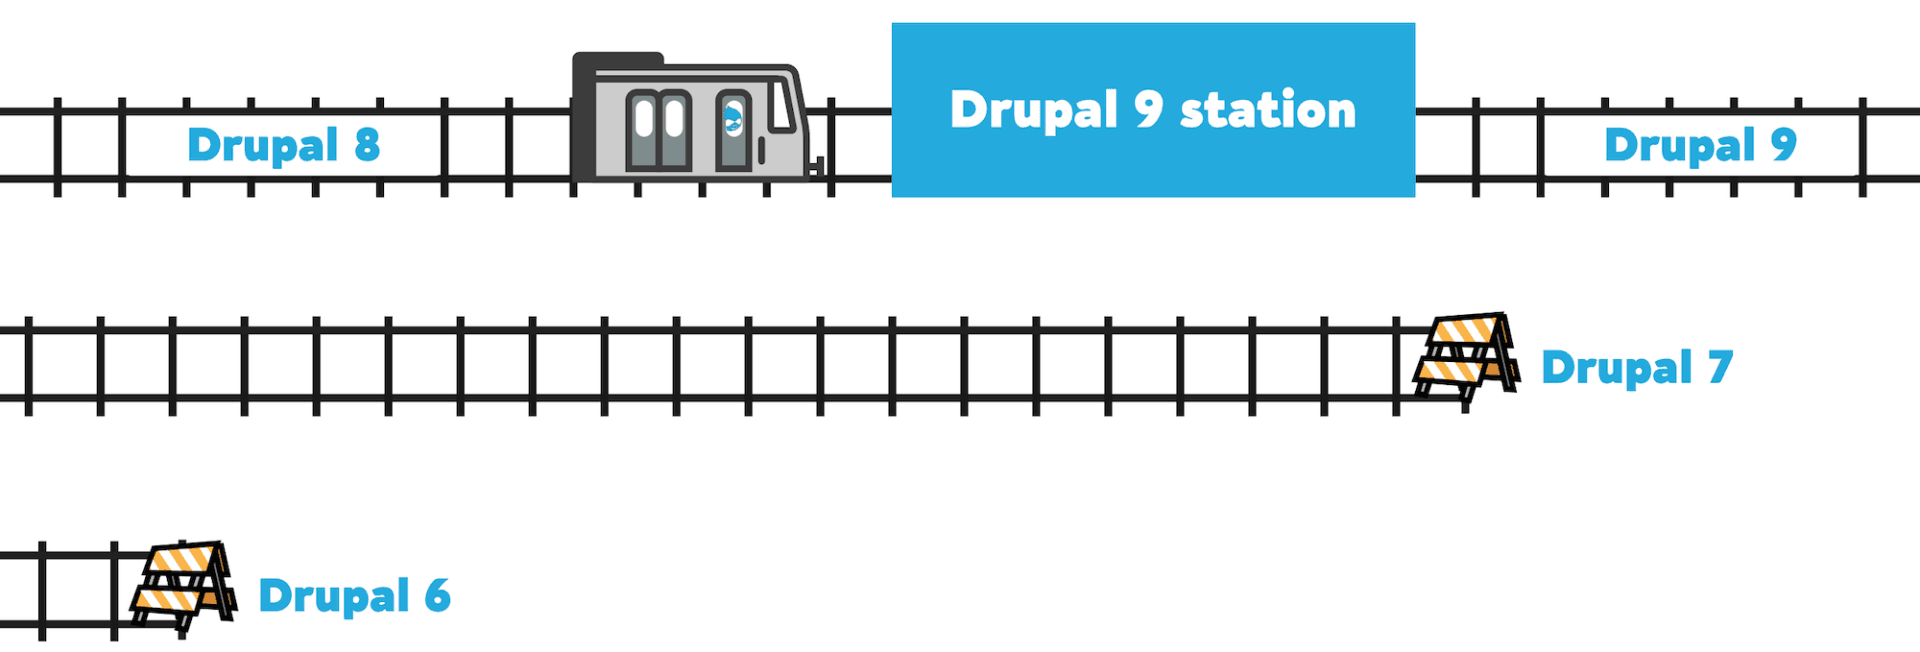 Train track illustration where the Drupal train is heading towards Drupal 9 station from Drupal 8.